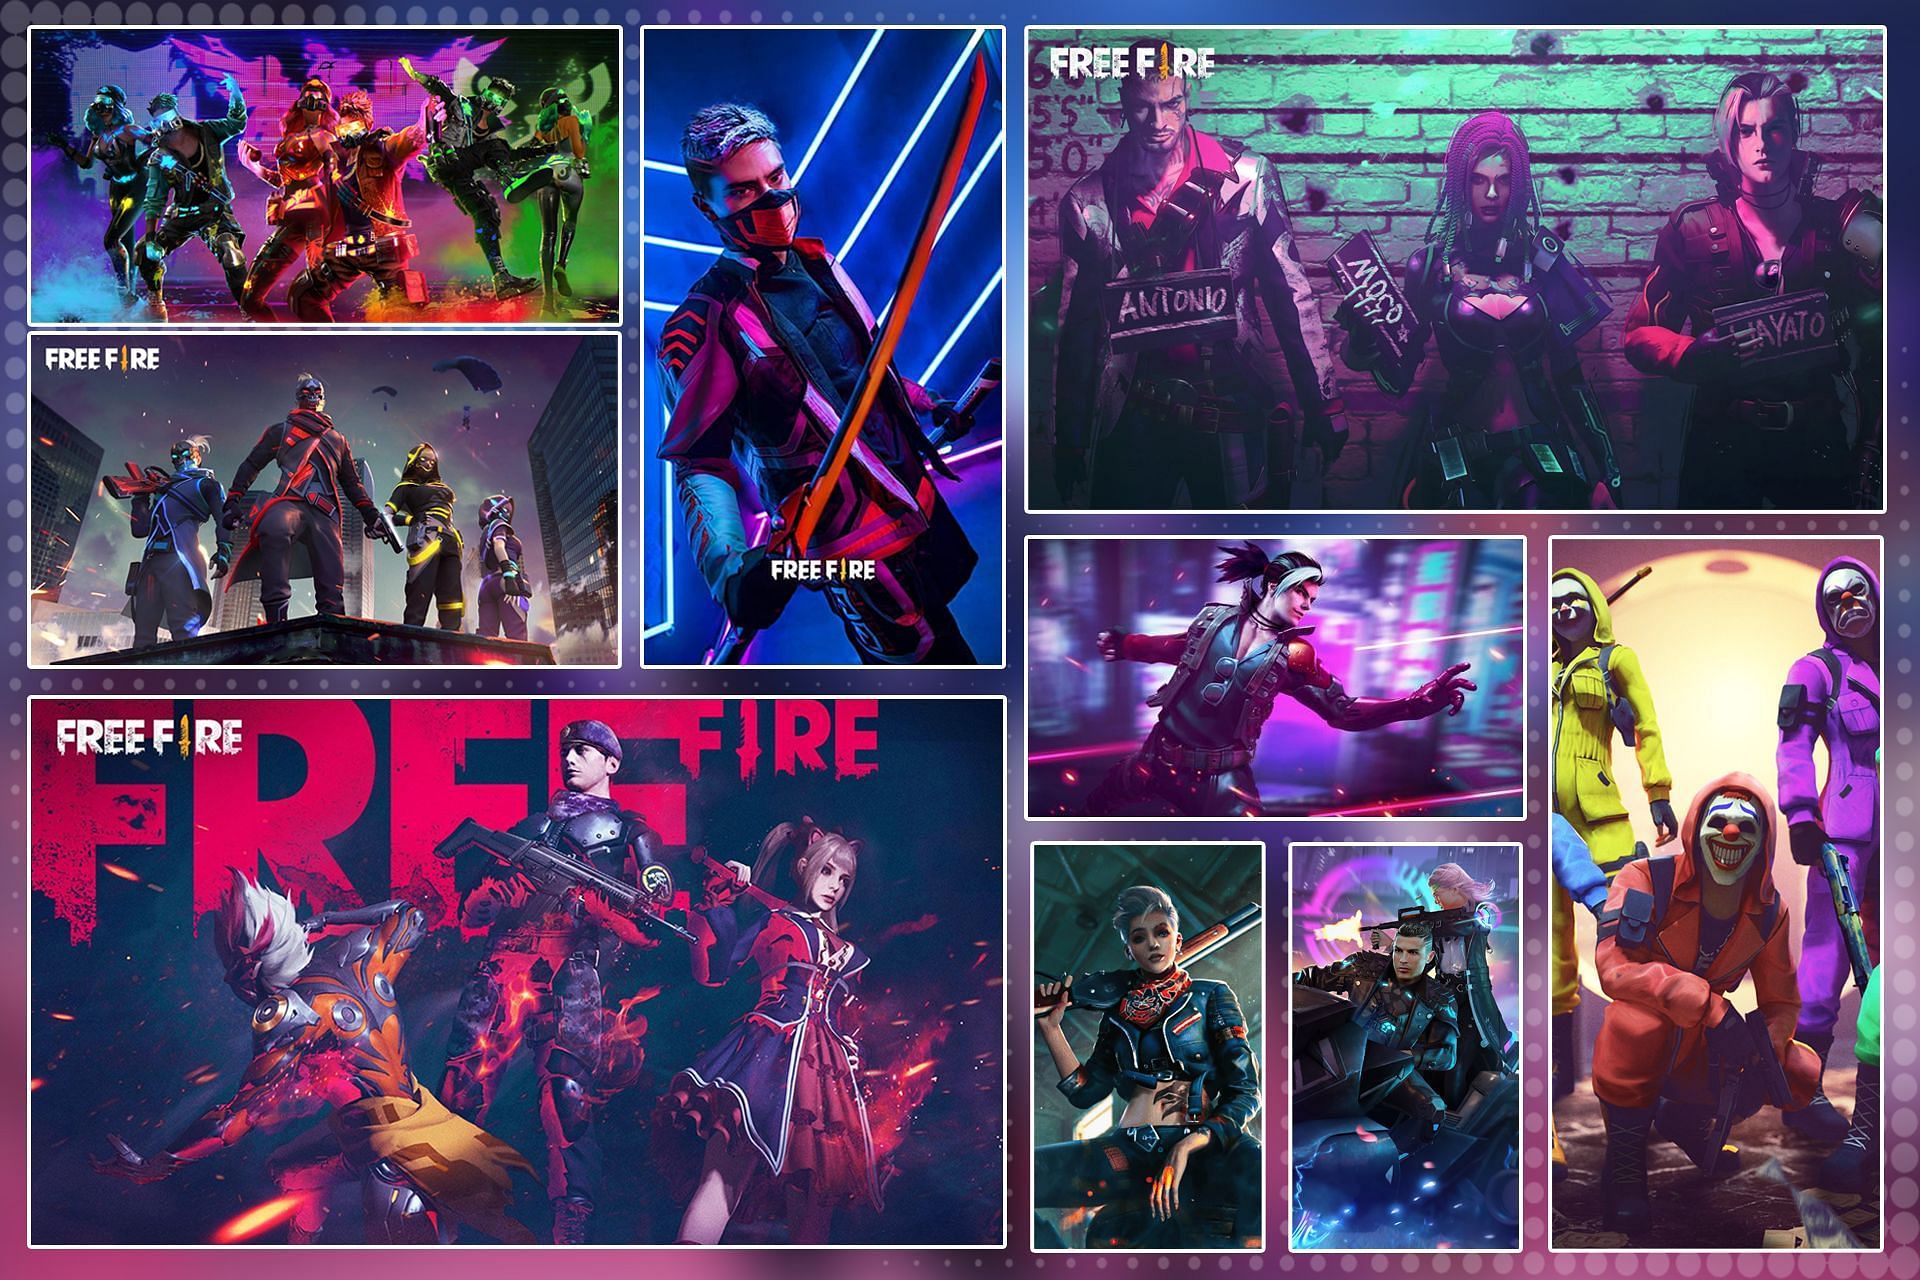 How to download Free Fire wallpapers in 2023